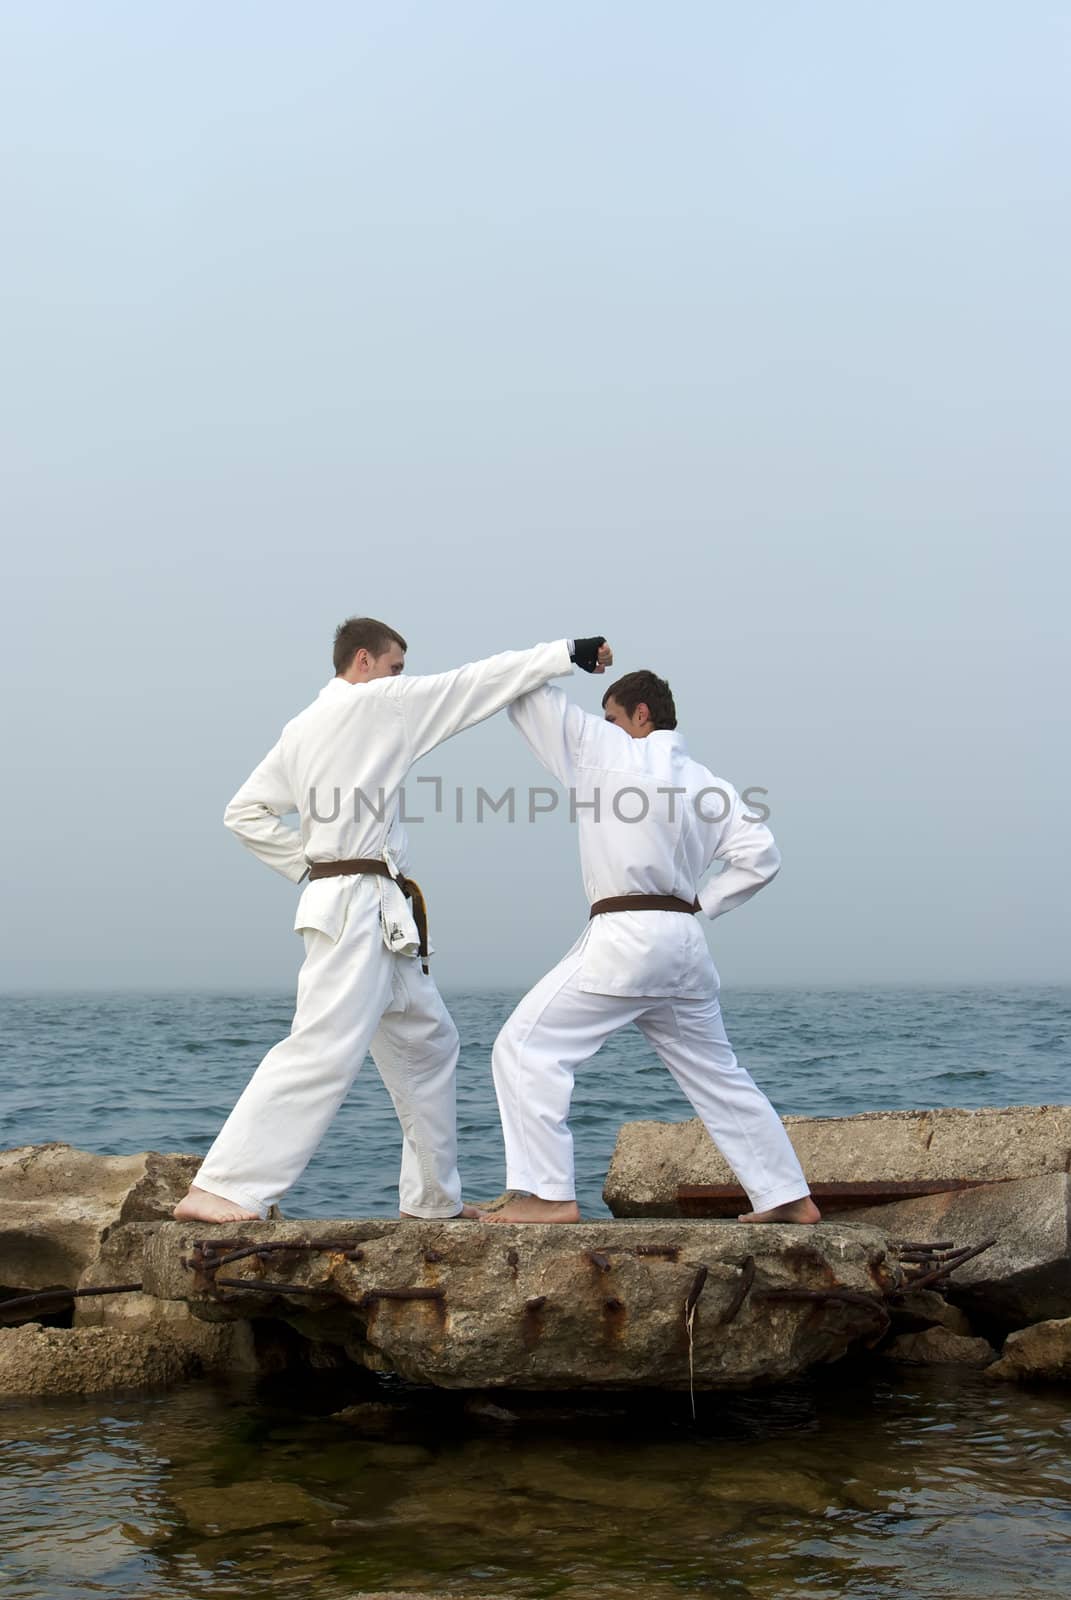 two karateka fight on the banks of the misty sea